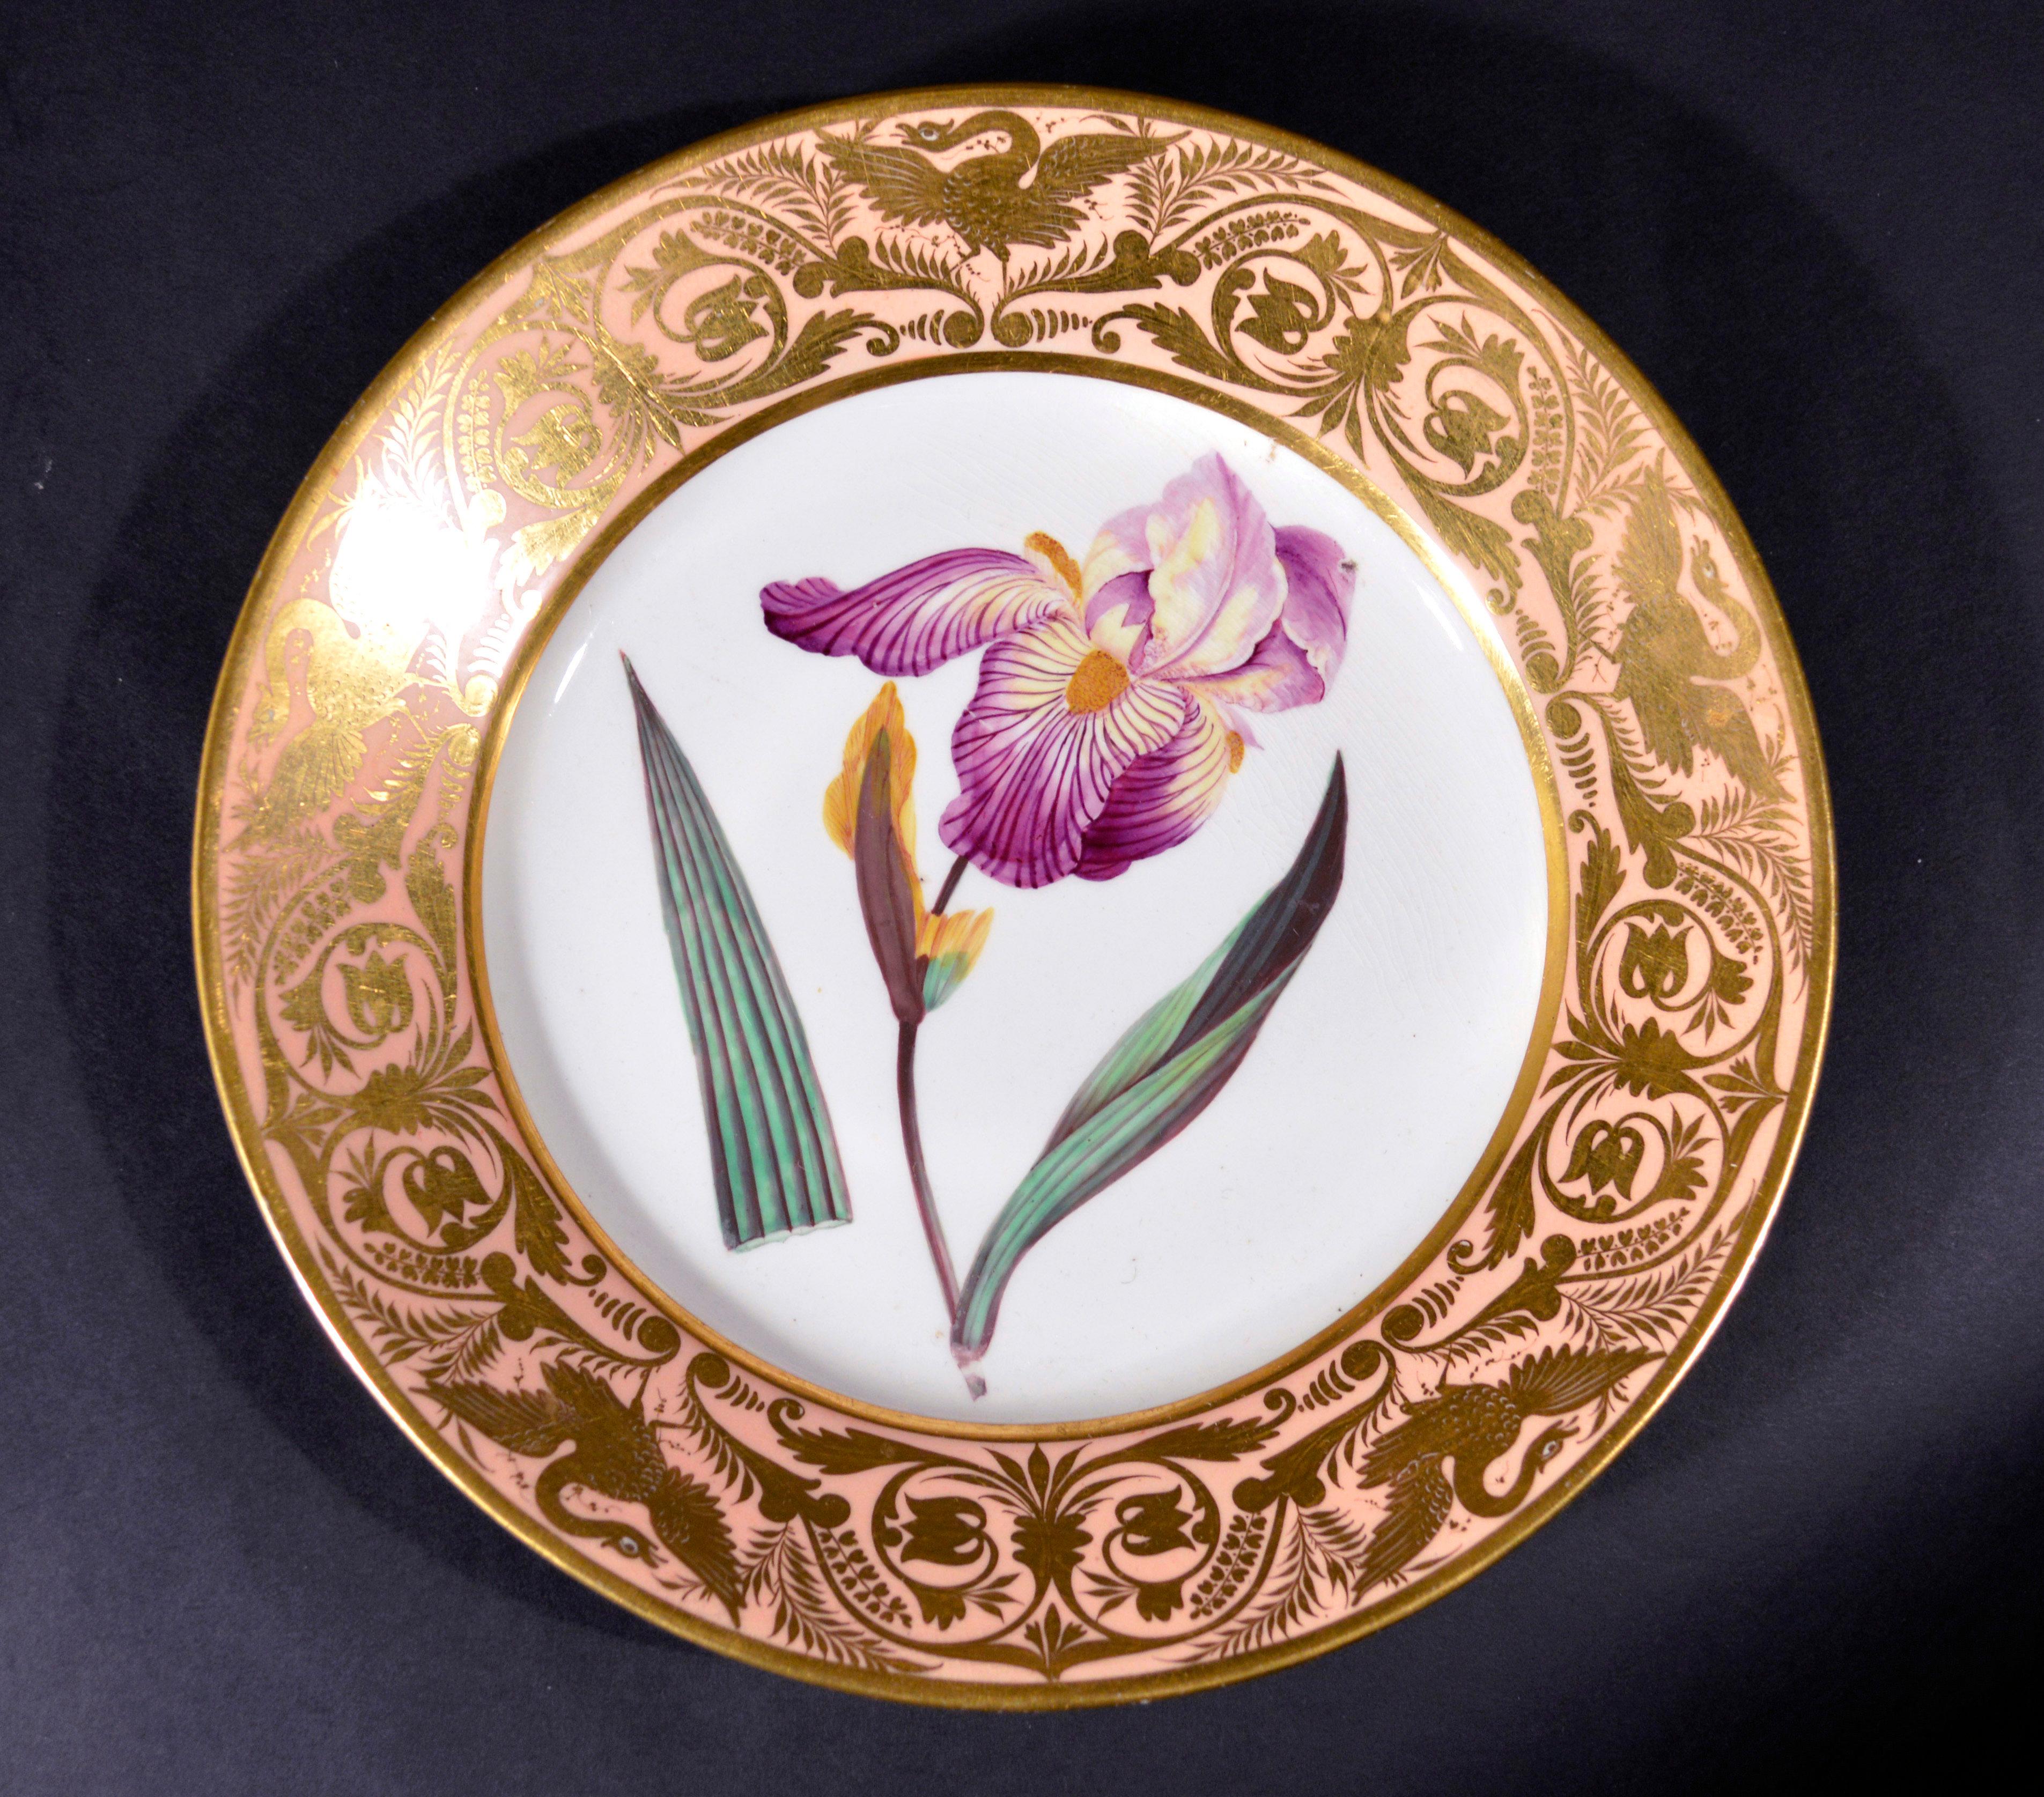 Antique Derby porcelain salmon plate, Elder scented iris,
After William Curtis's botanical magazine, volume 6, April 1, 1792, plate 187.
By John Brewer, circa 1815.

The Derby porcelain plate is boldly painted with an Elder Scented Iris